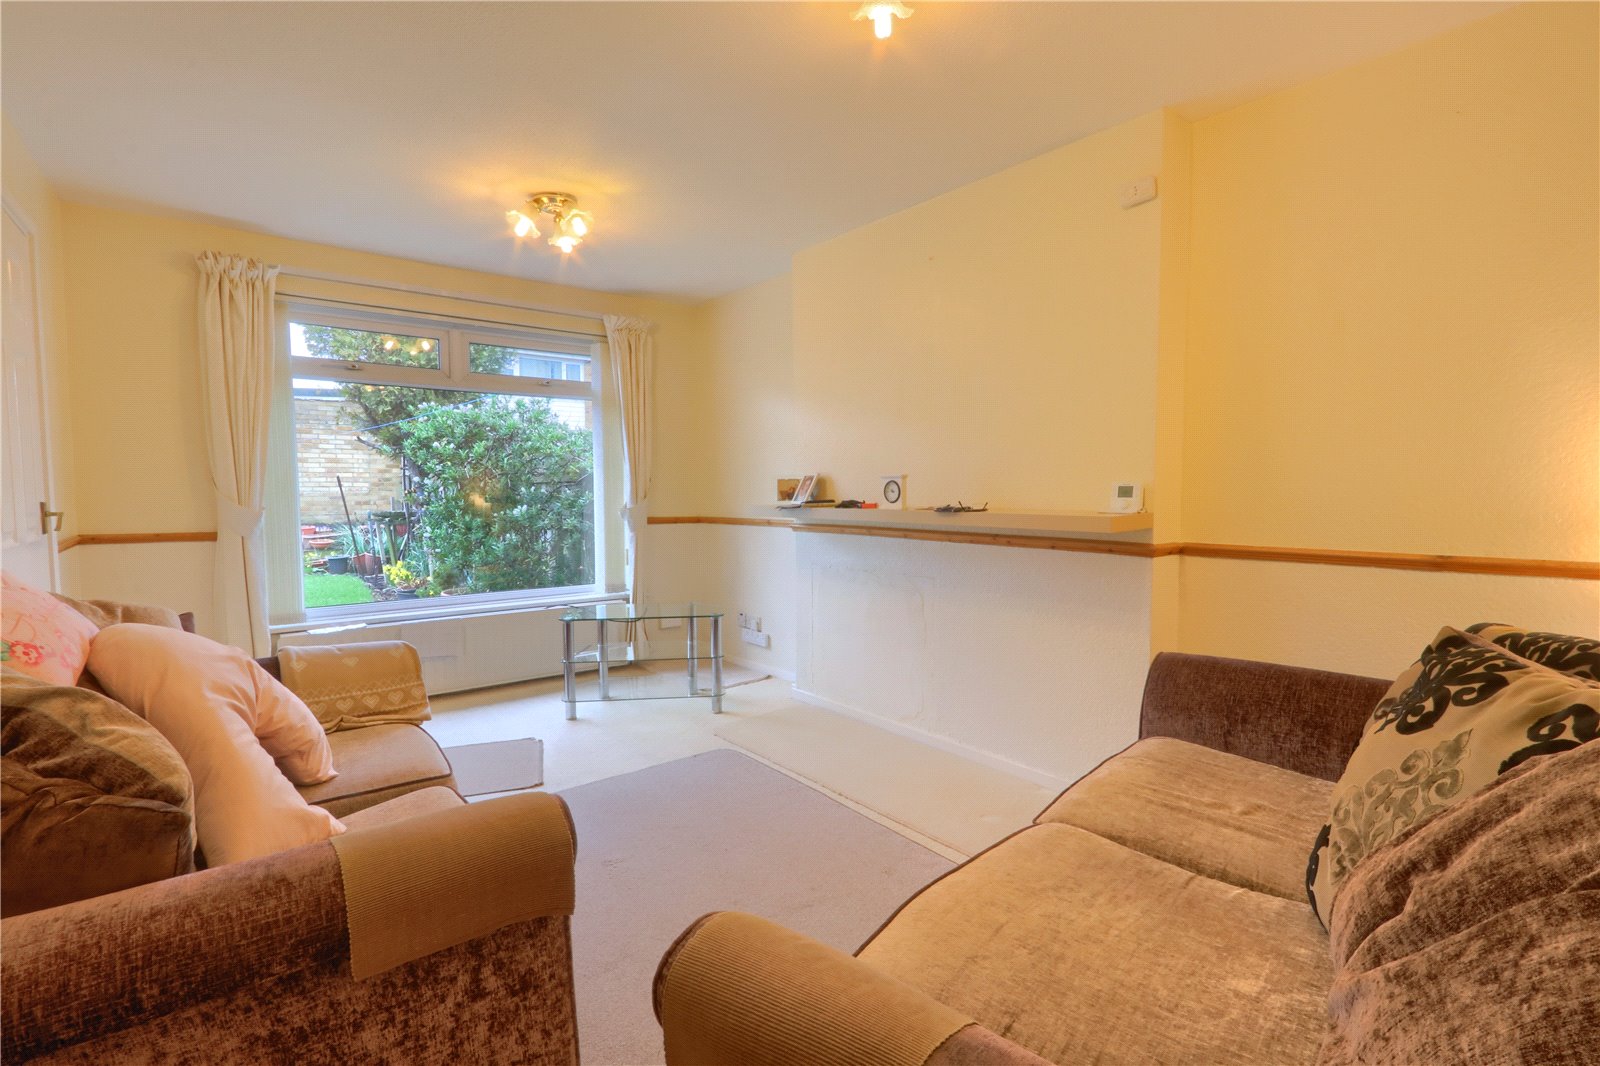 2 bed bungalow for sale in Sherwood Drive, Marske-by-the-Sea 1